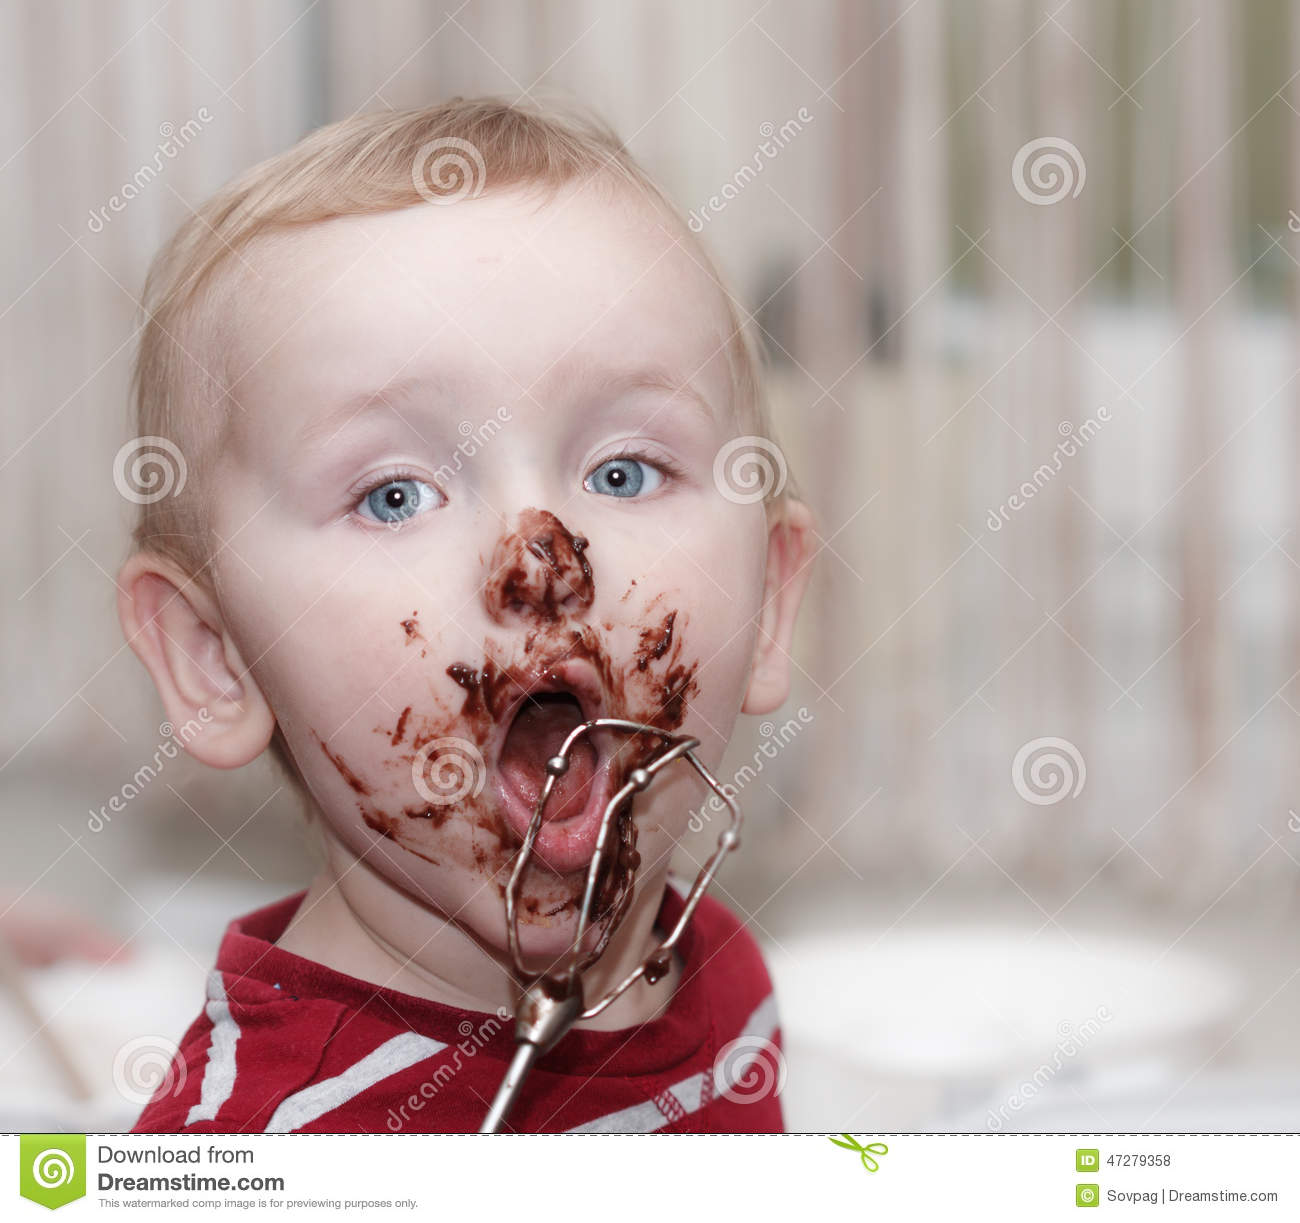 Chocolate On Face Funny Cute Eating Boy Messy Eater 